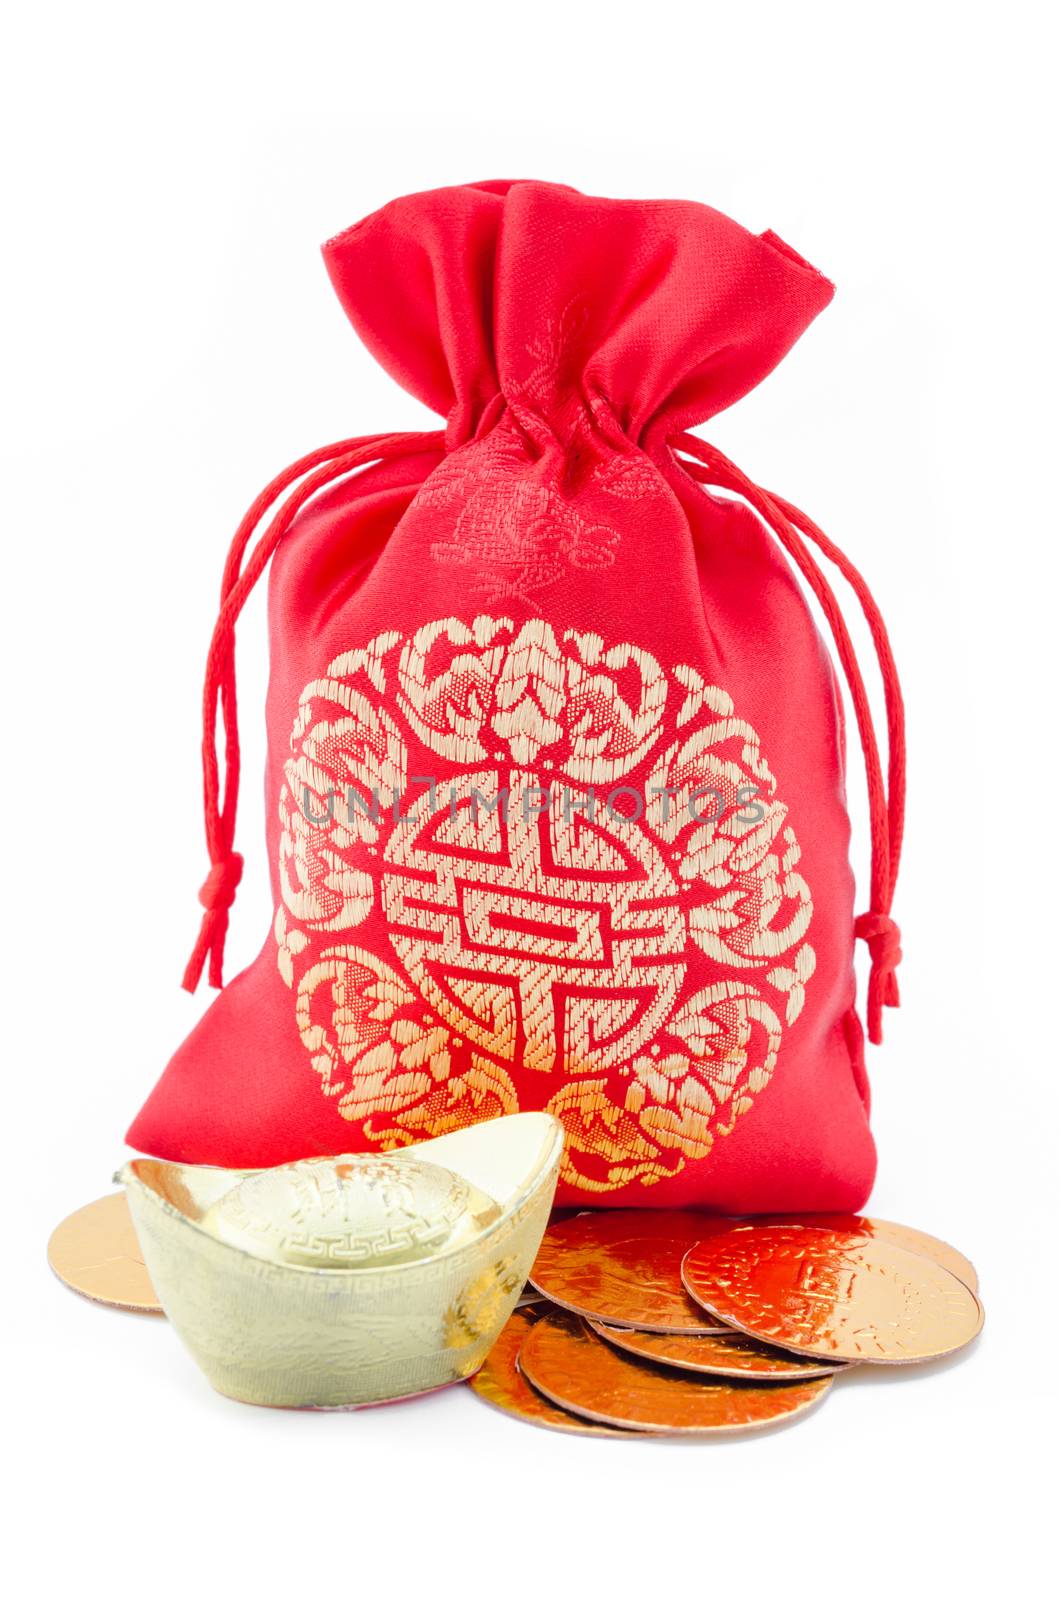 Chinese New Year Gift Bag and Gold ingot Ornament on White Background